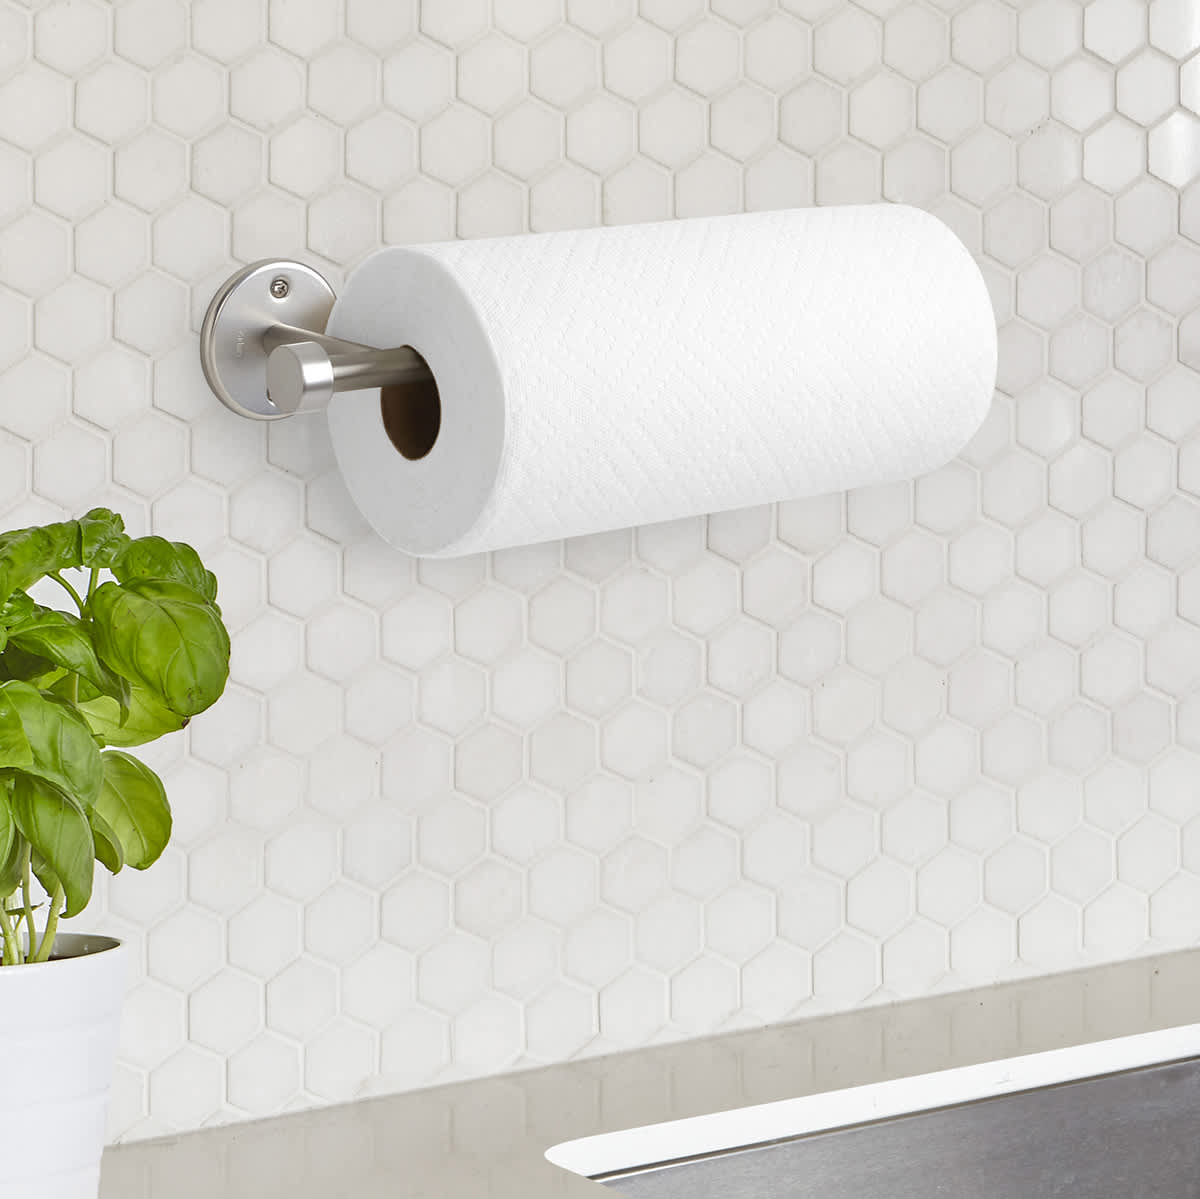 This $10 Paper Towel Holder Sticks Onto The Wall And Saves Counter Space